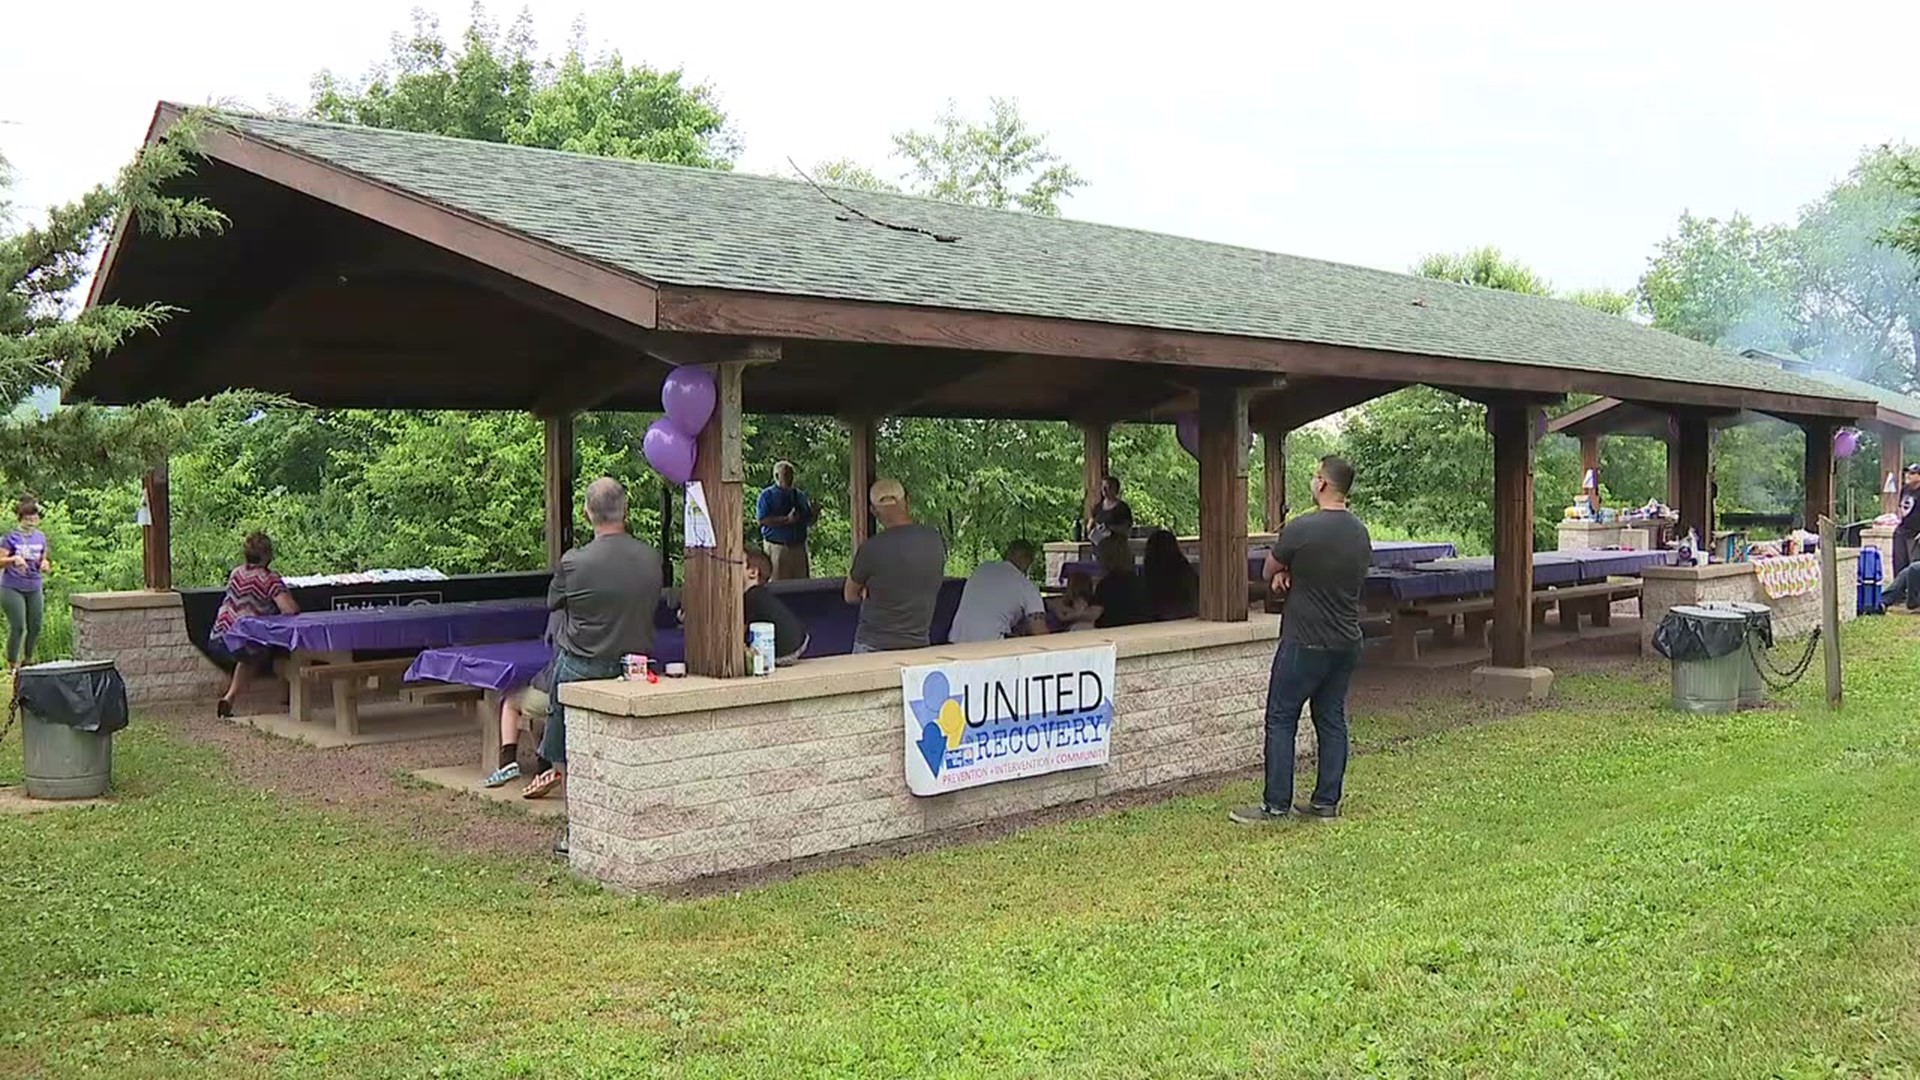 The event at Briar Creek Lake featured speakers sharing personal recovery stories.